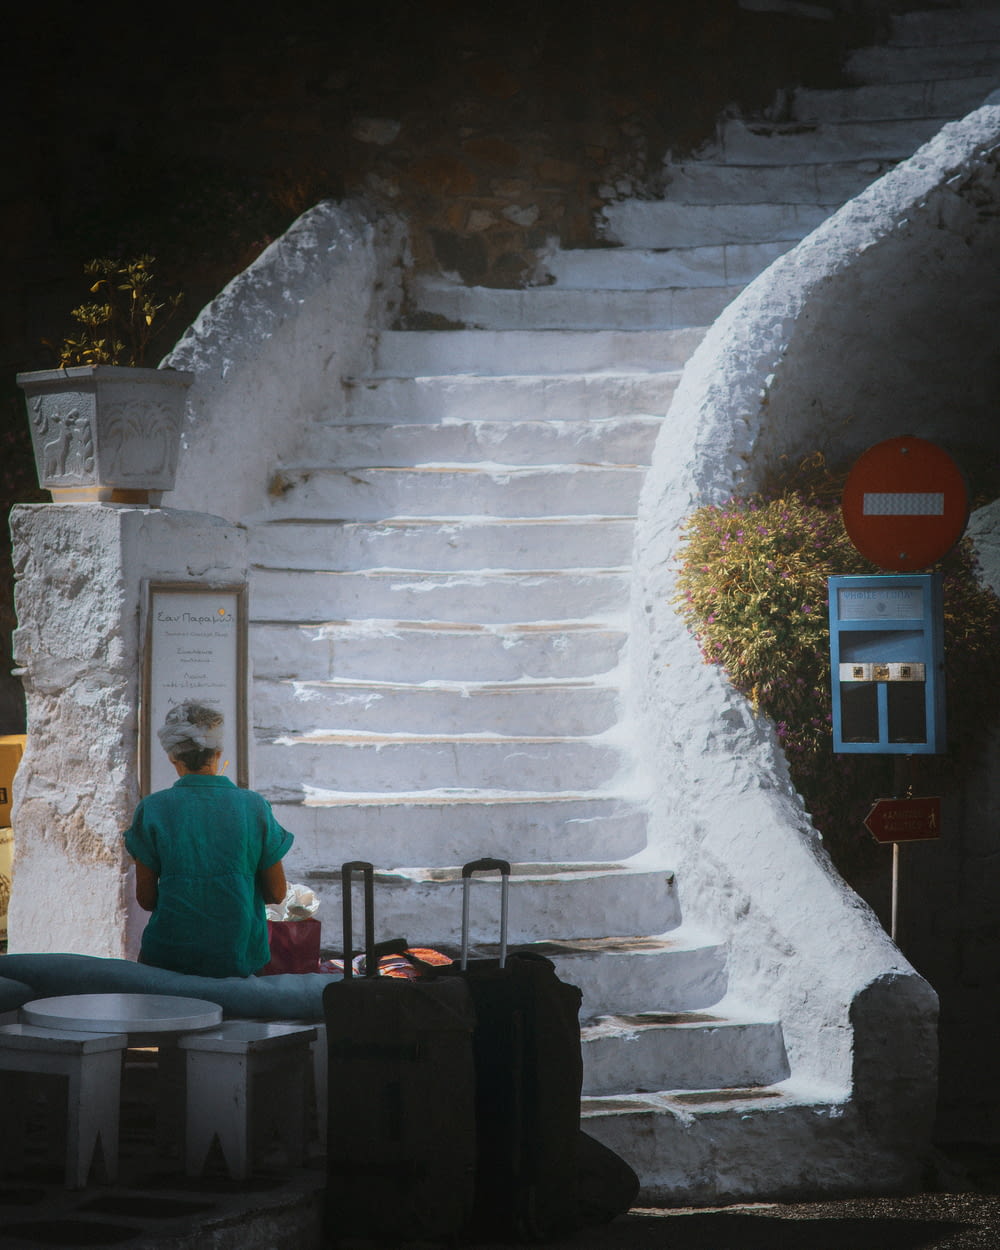 a man sitting on a set of stairs next to luggage